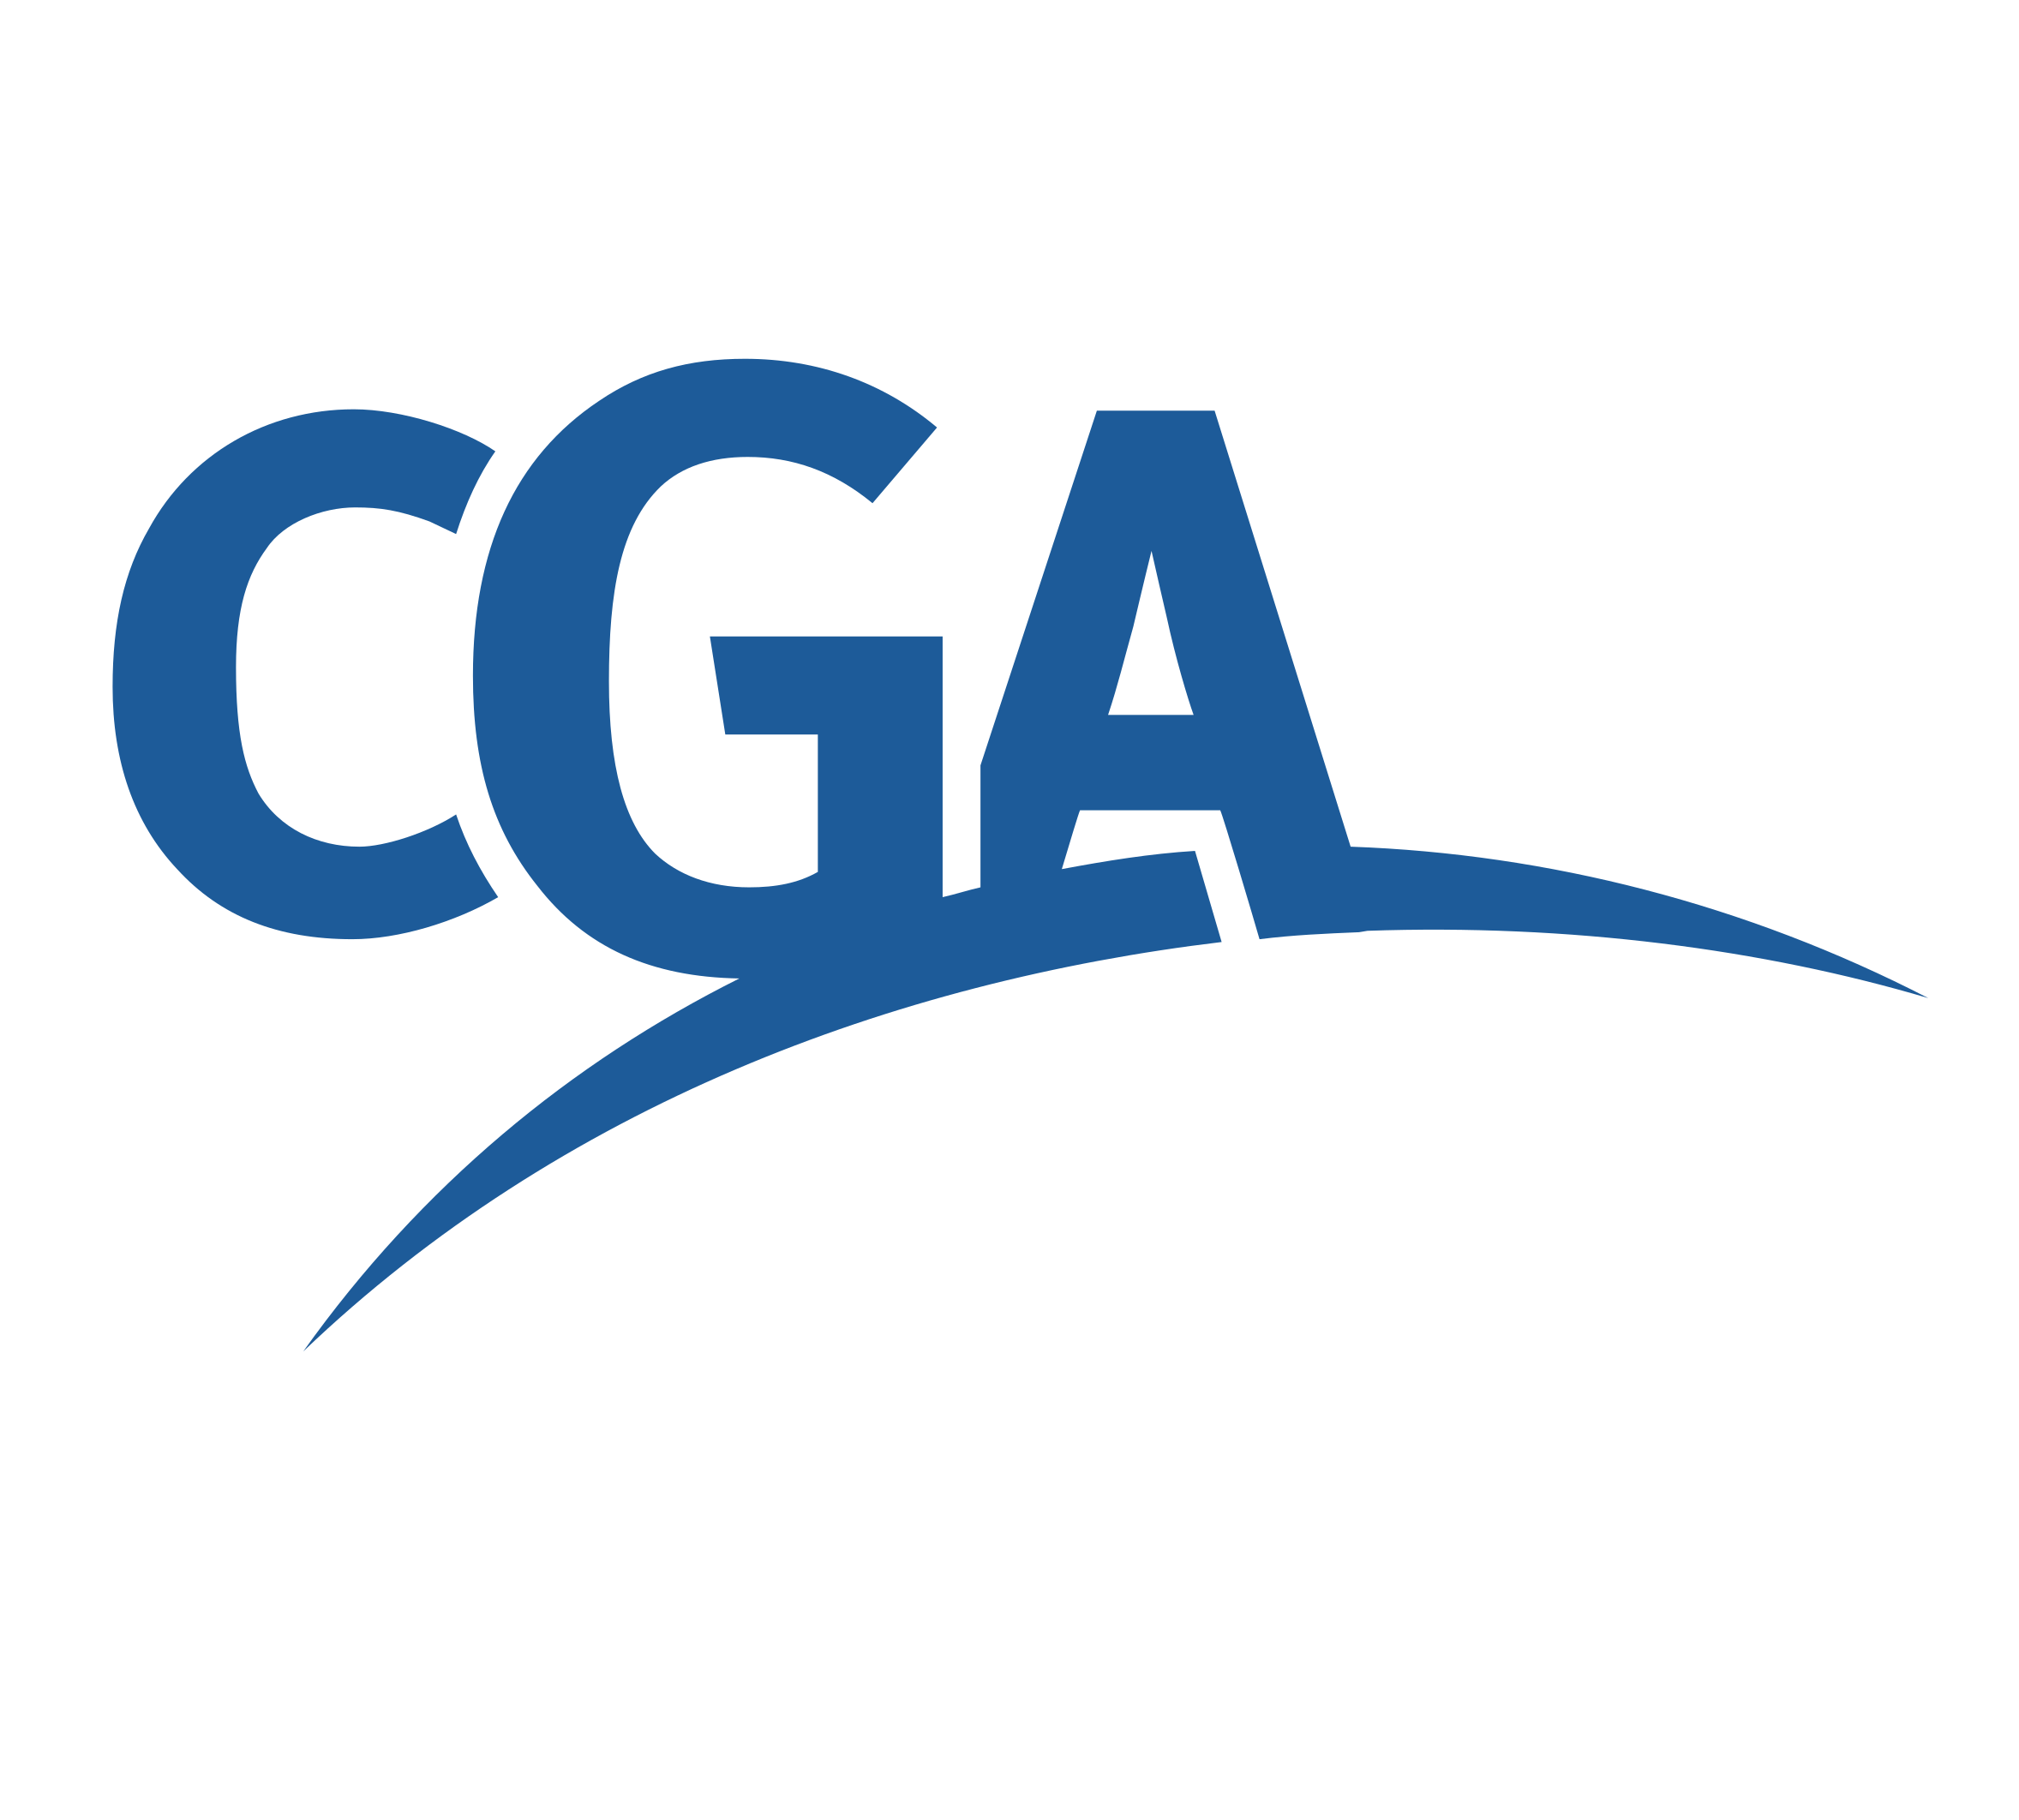 cga professional accountant logo with transparent background.